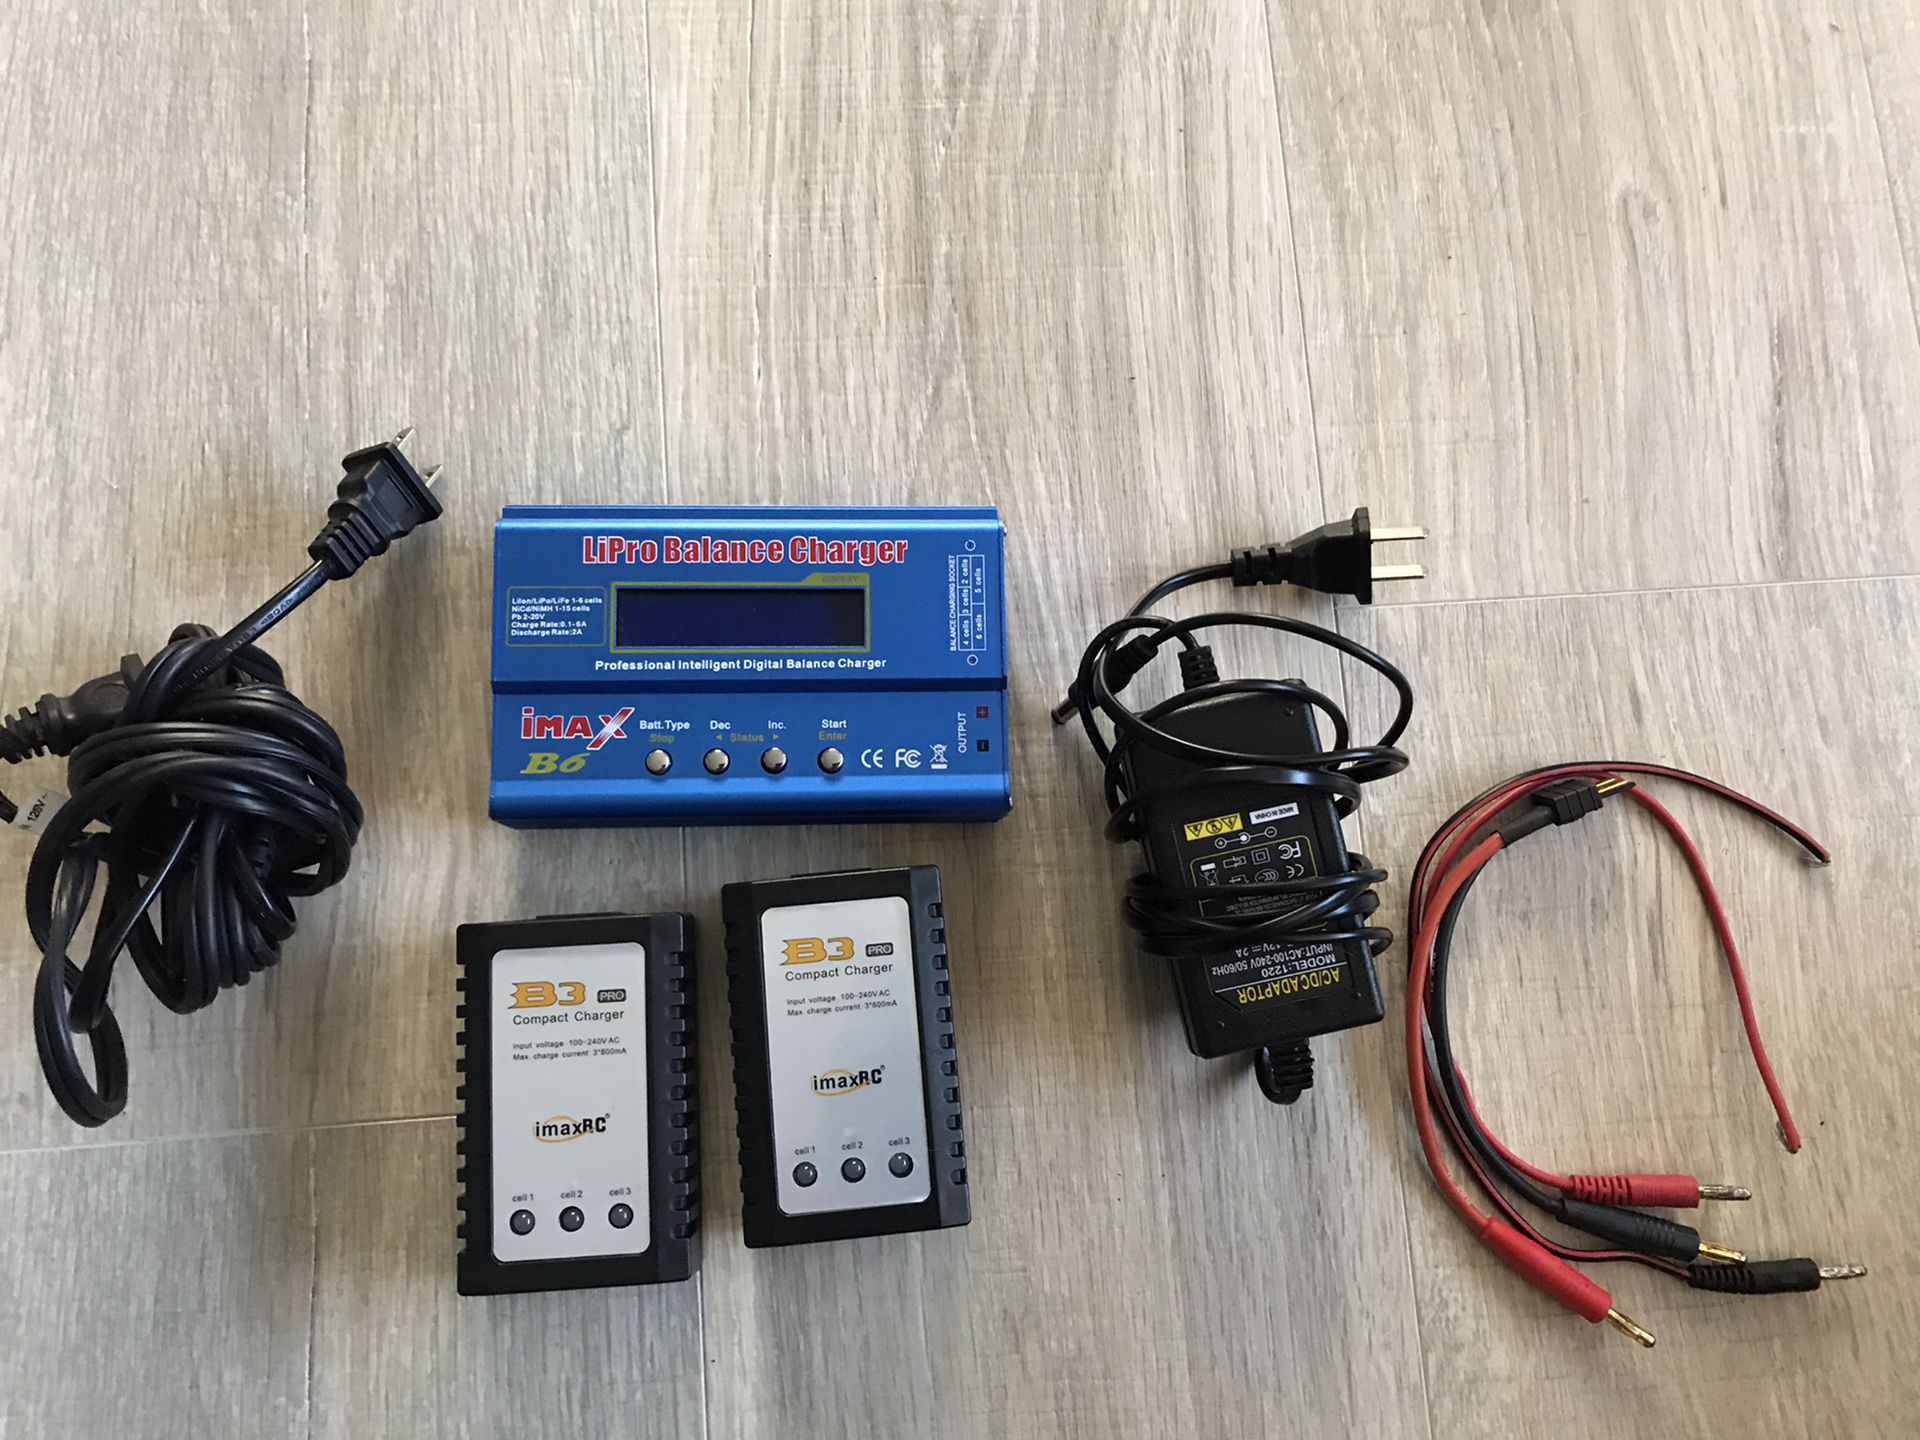 IMAX B3 and B6 RC Lipo battery chargers.